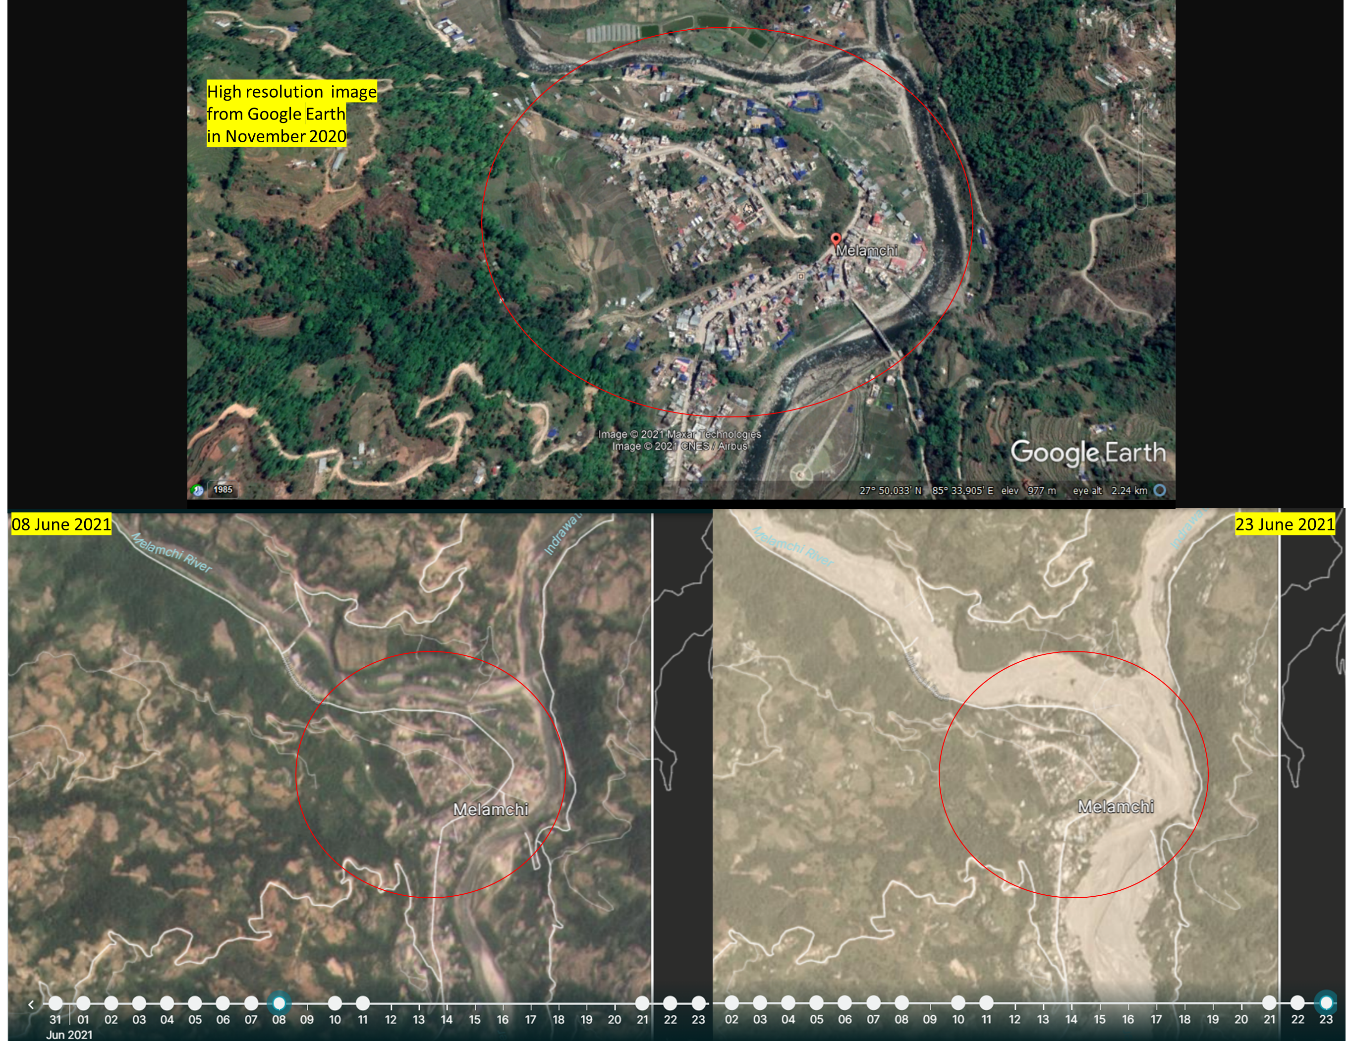 The Melamchi area, before and after the 15 June 2021 disaster (Image: Google Earth and Planet)